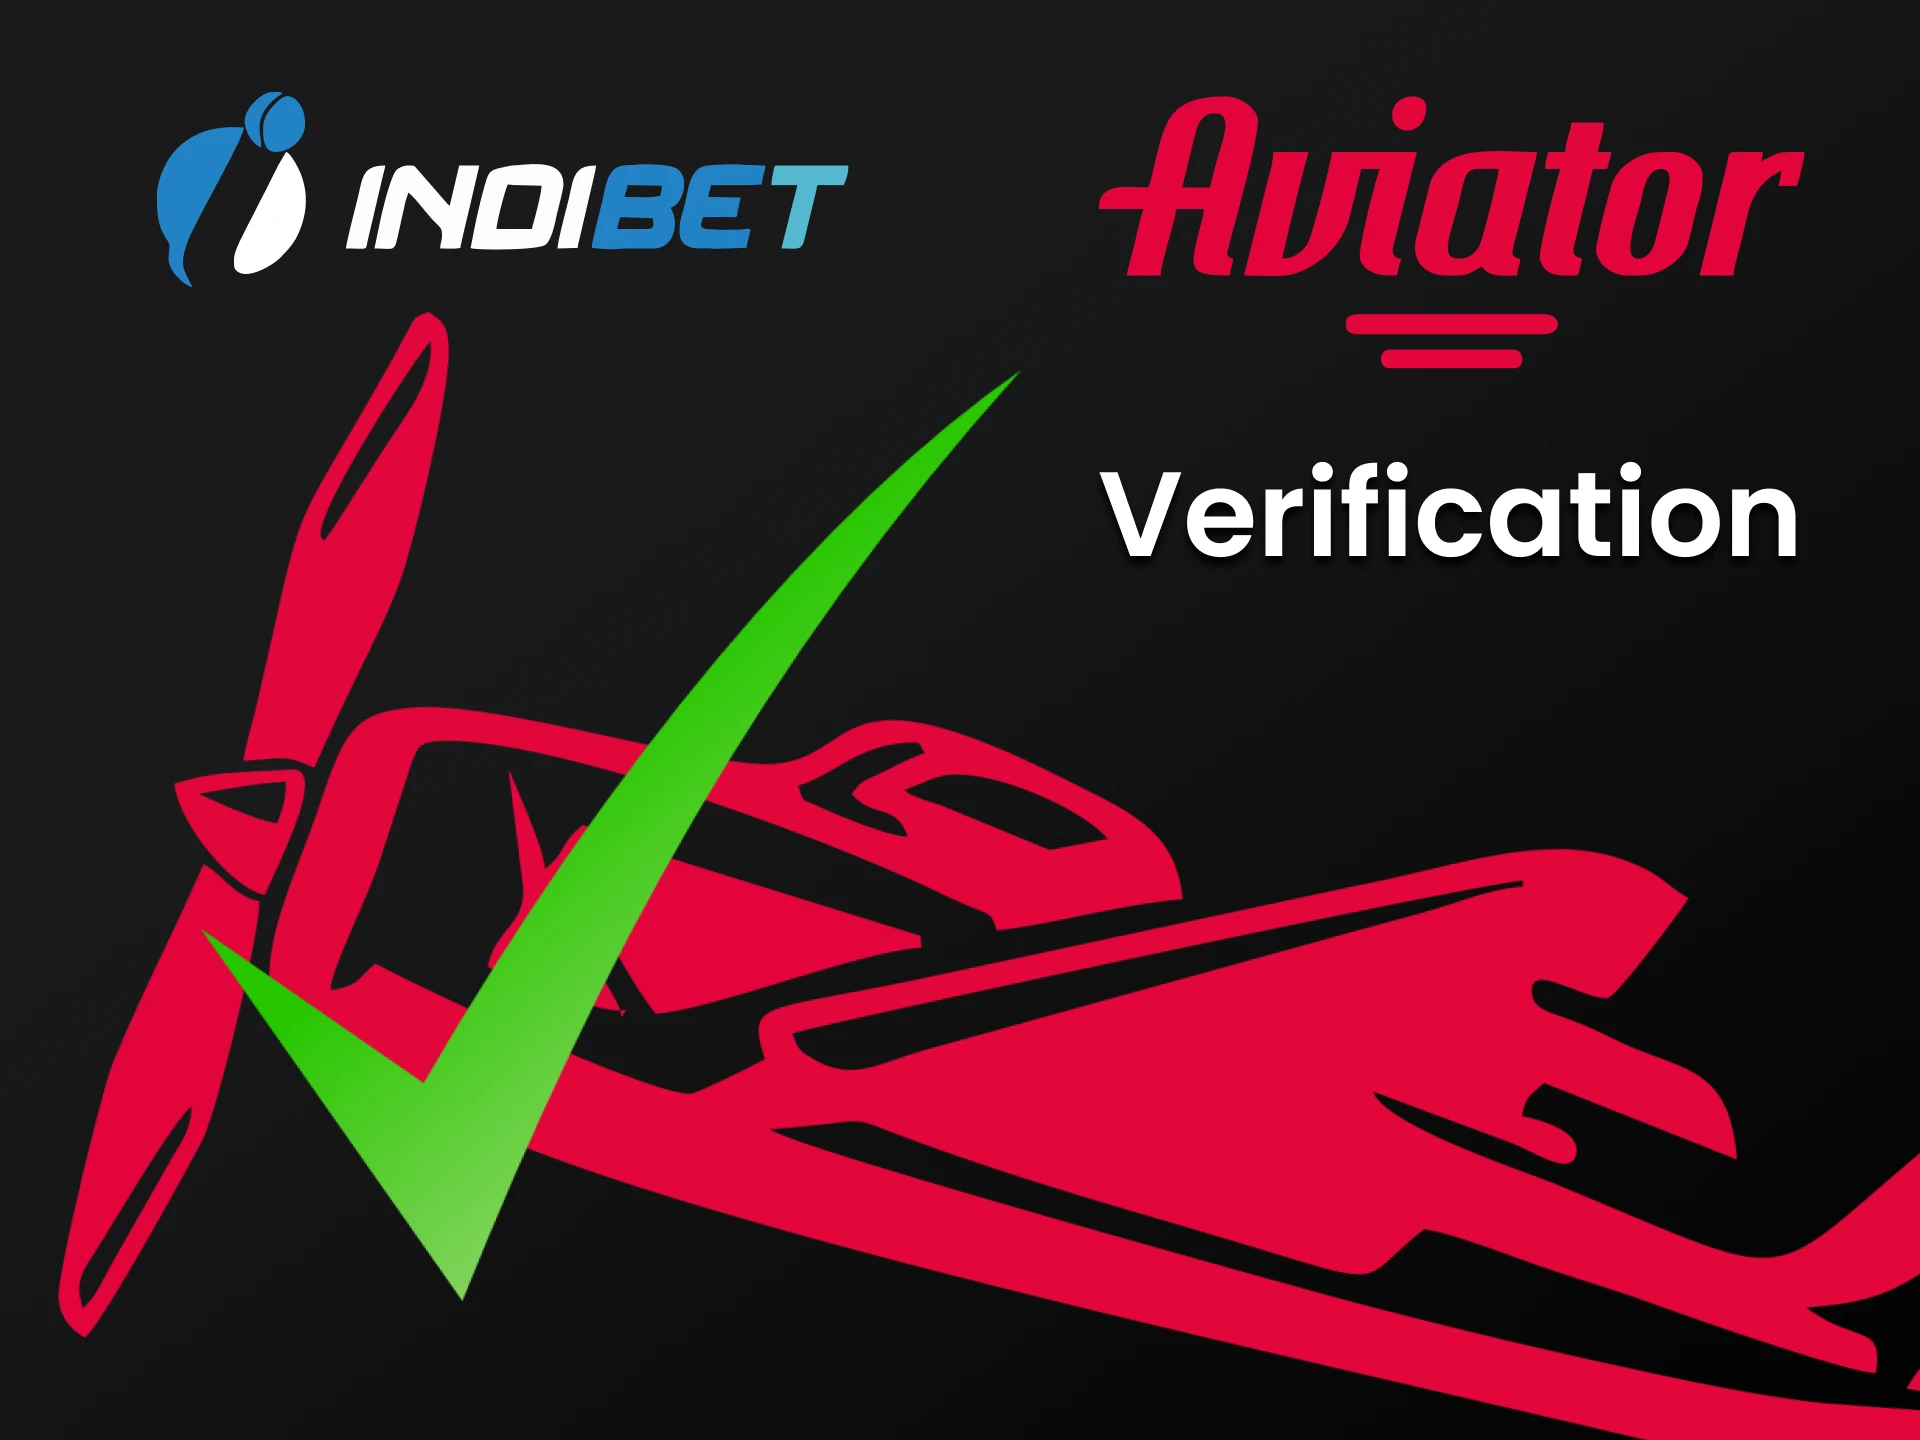 Fill in your personal details on the Indibet website for the Aviator.